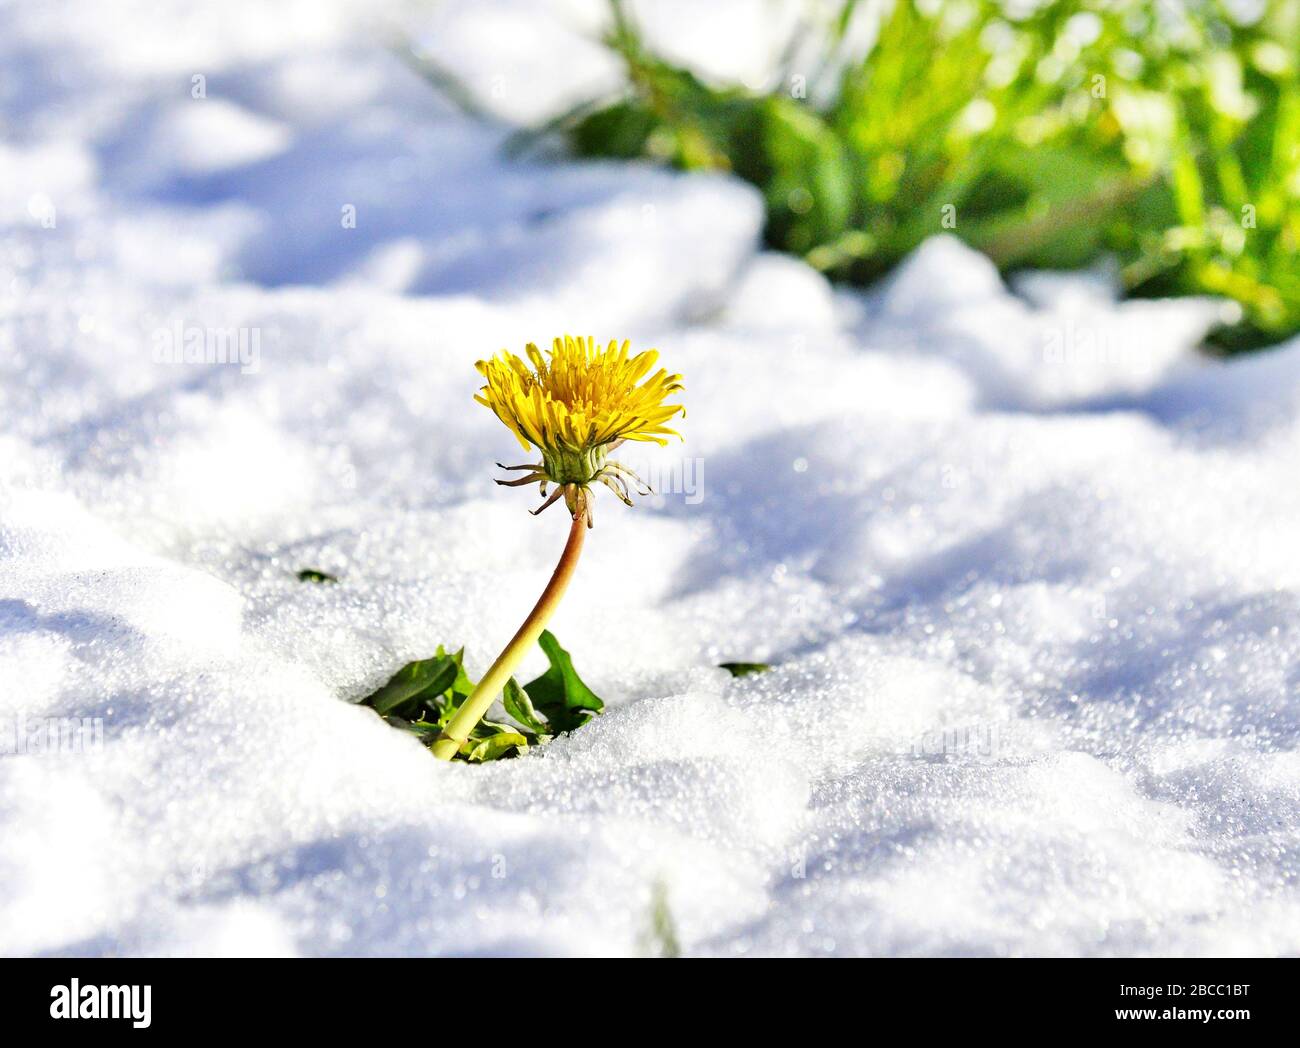 dandelion on on a fresh snow in april iage Stock Photo